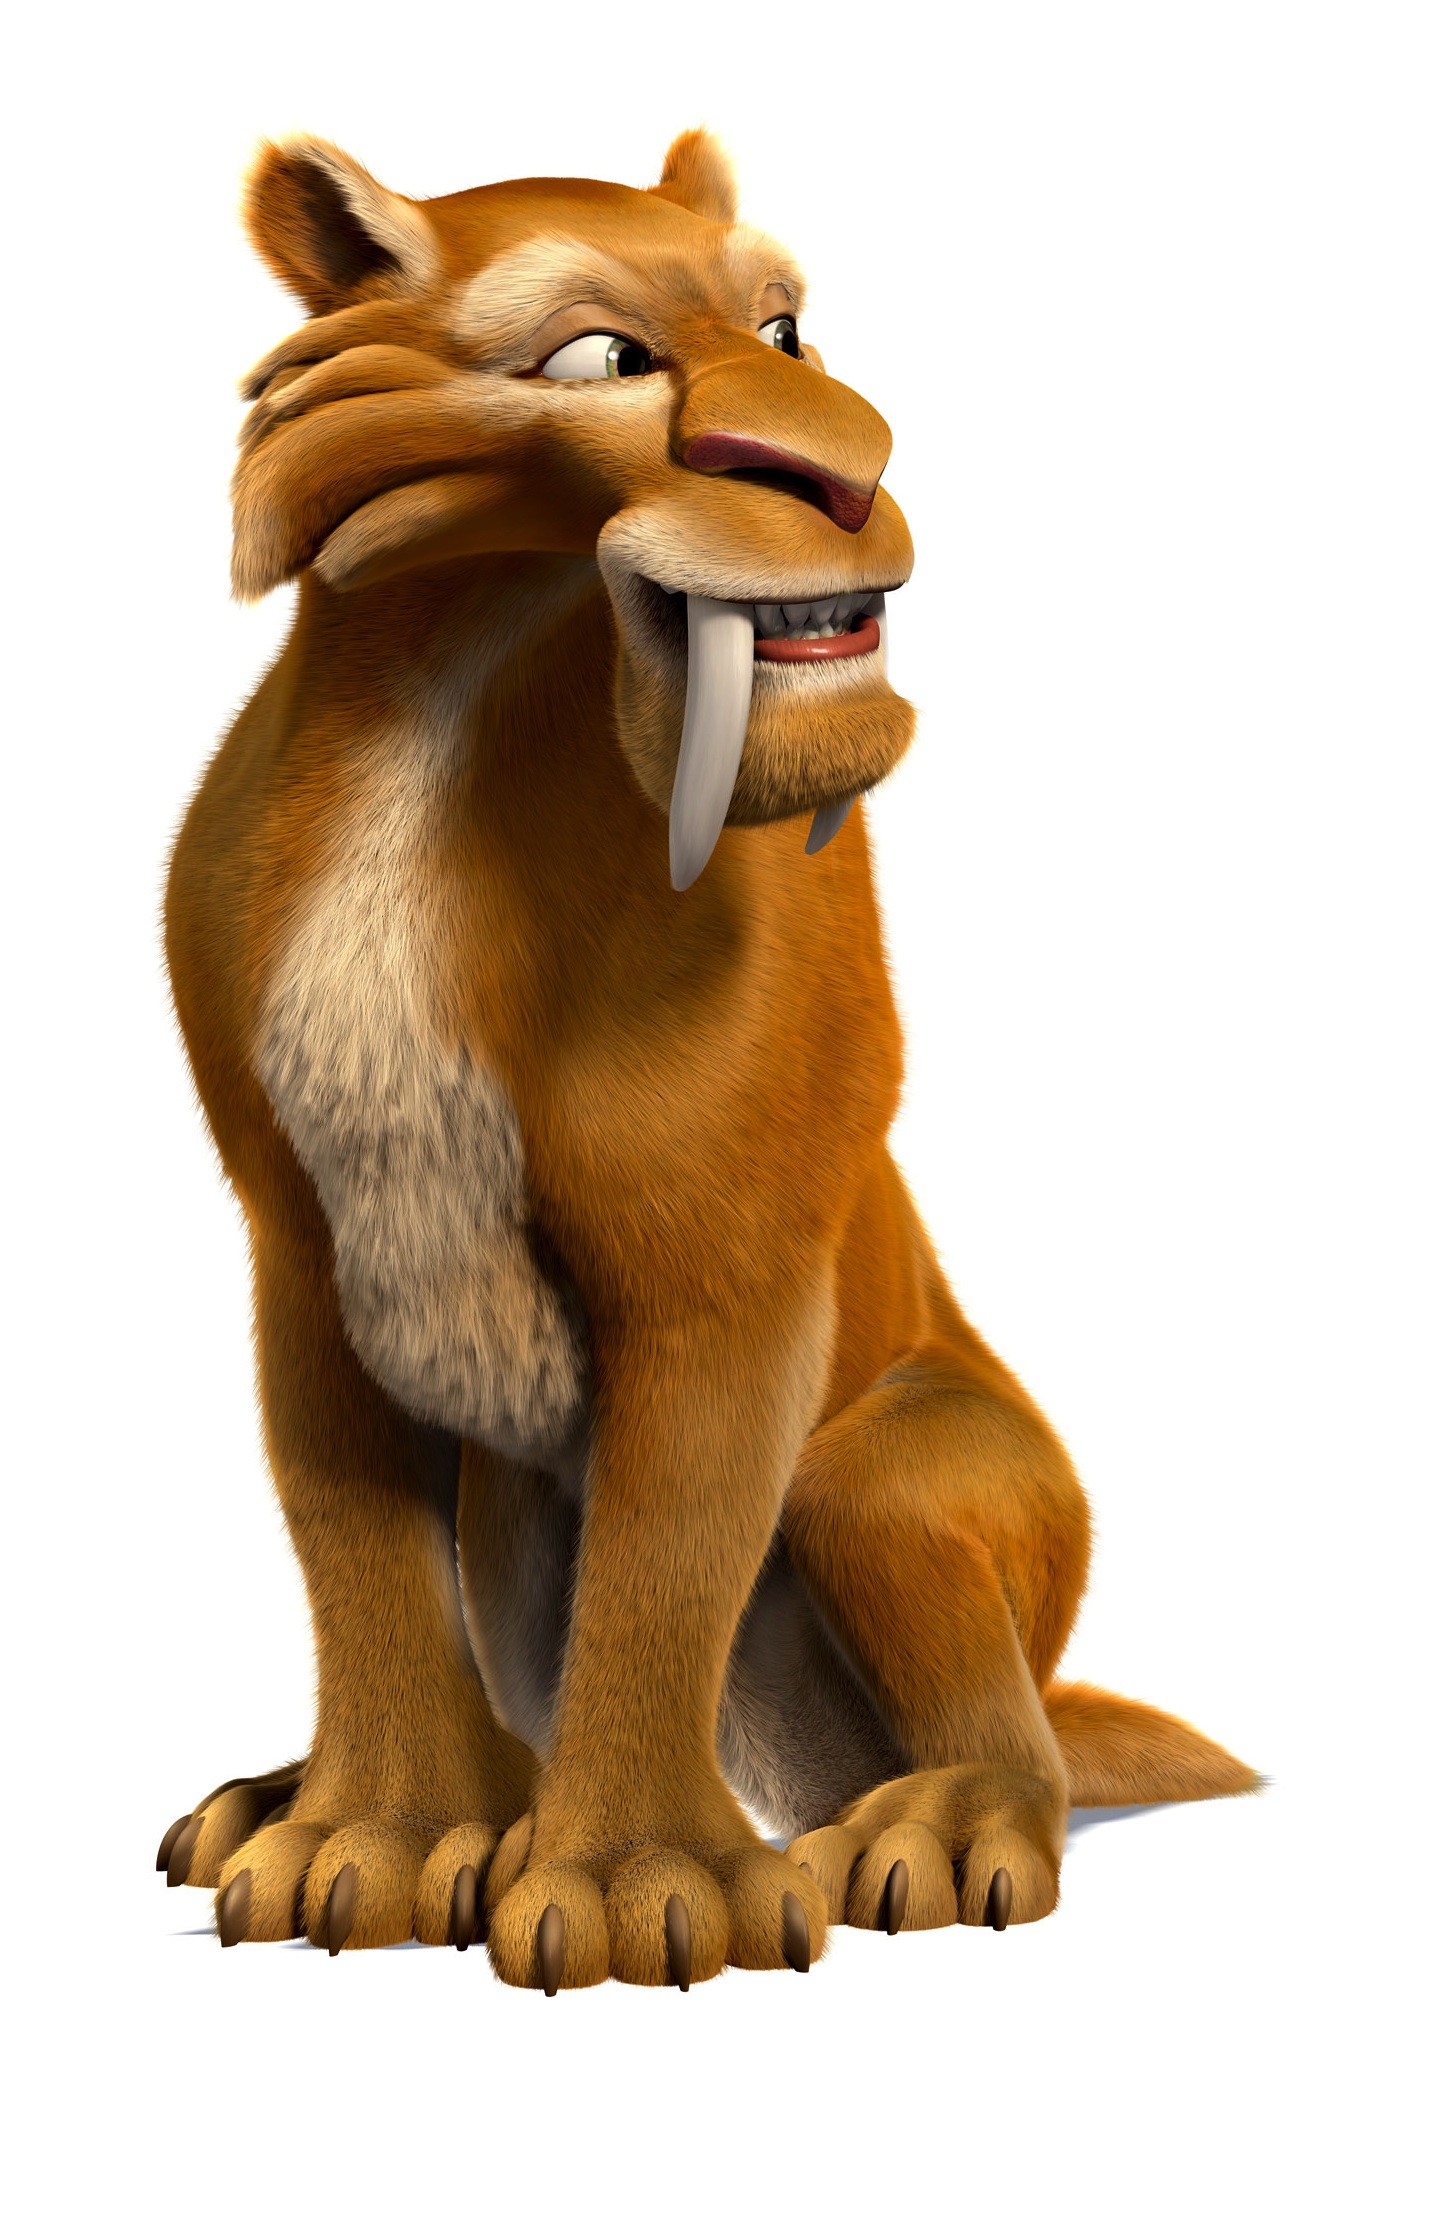 1433x2237 Diego, my favorite character from the Ice Age movies